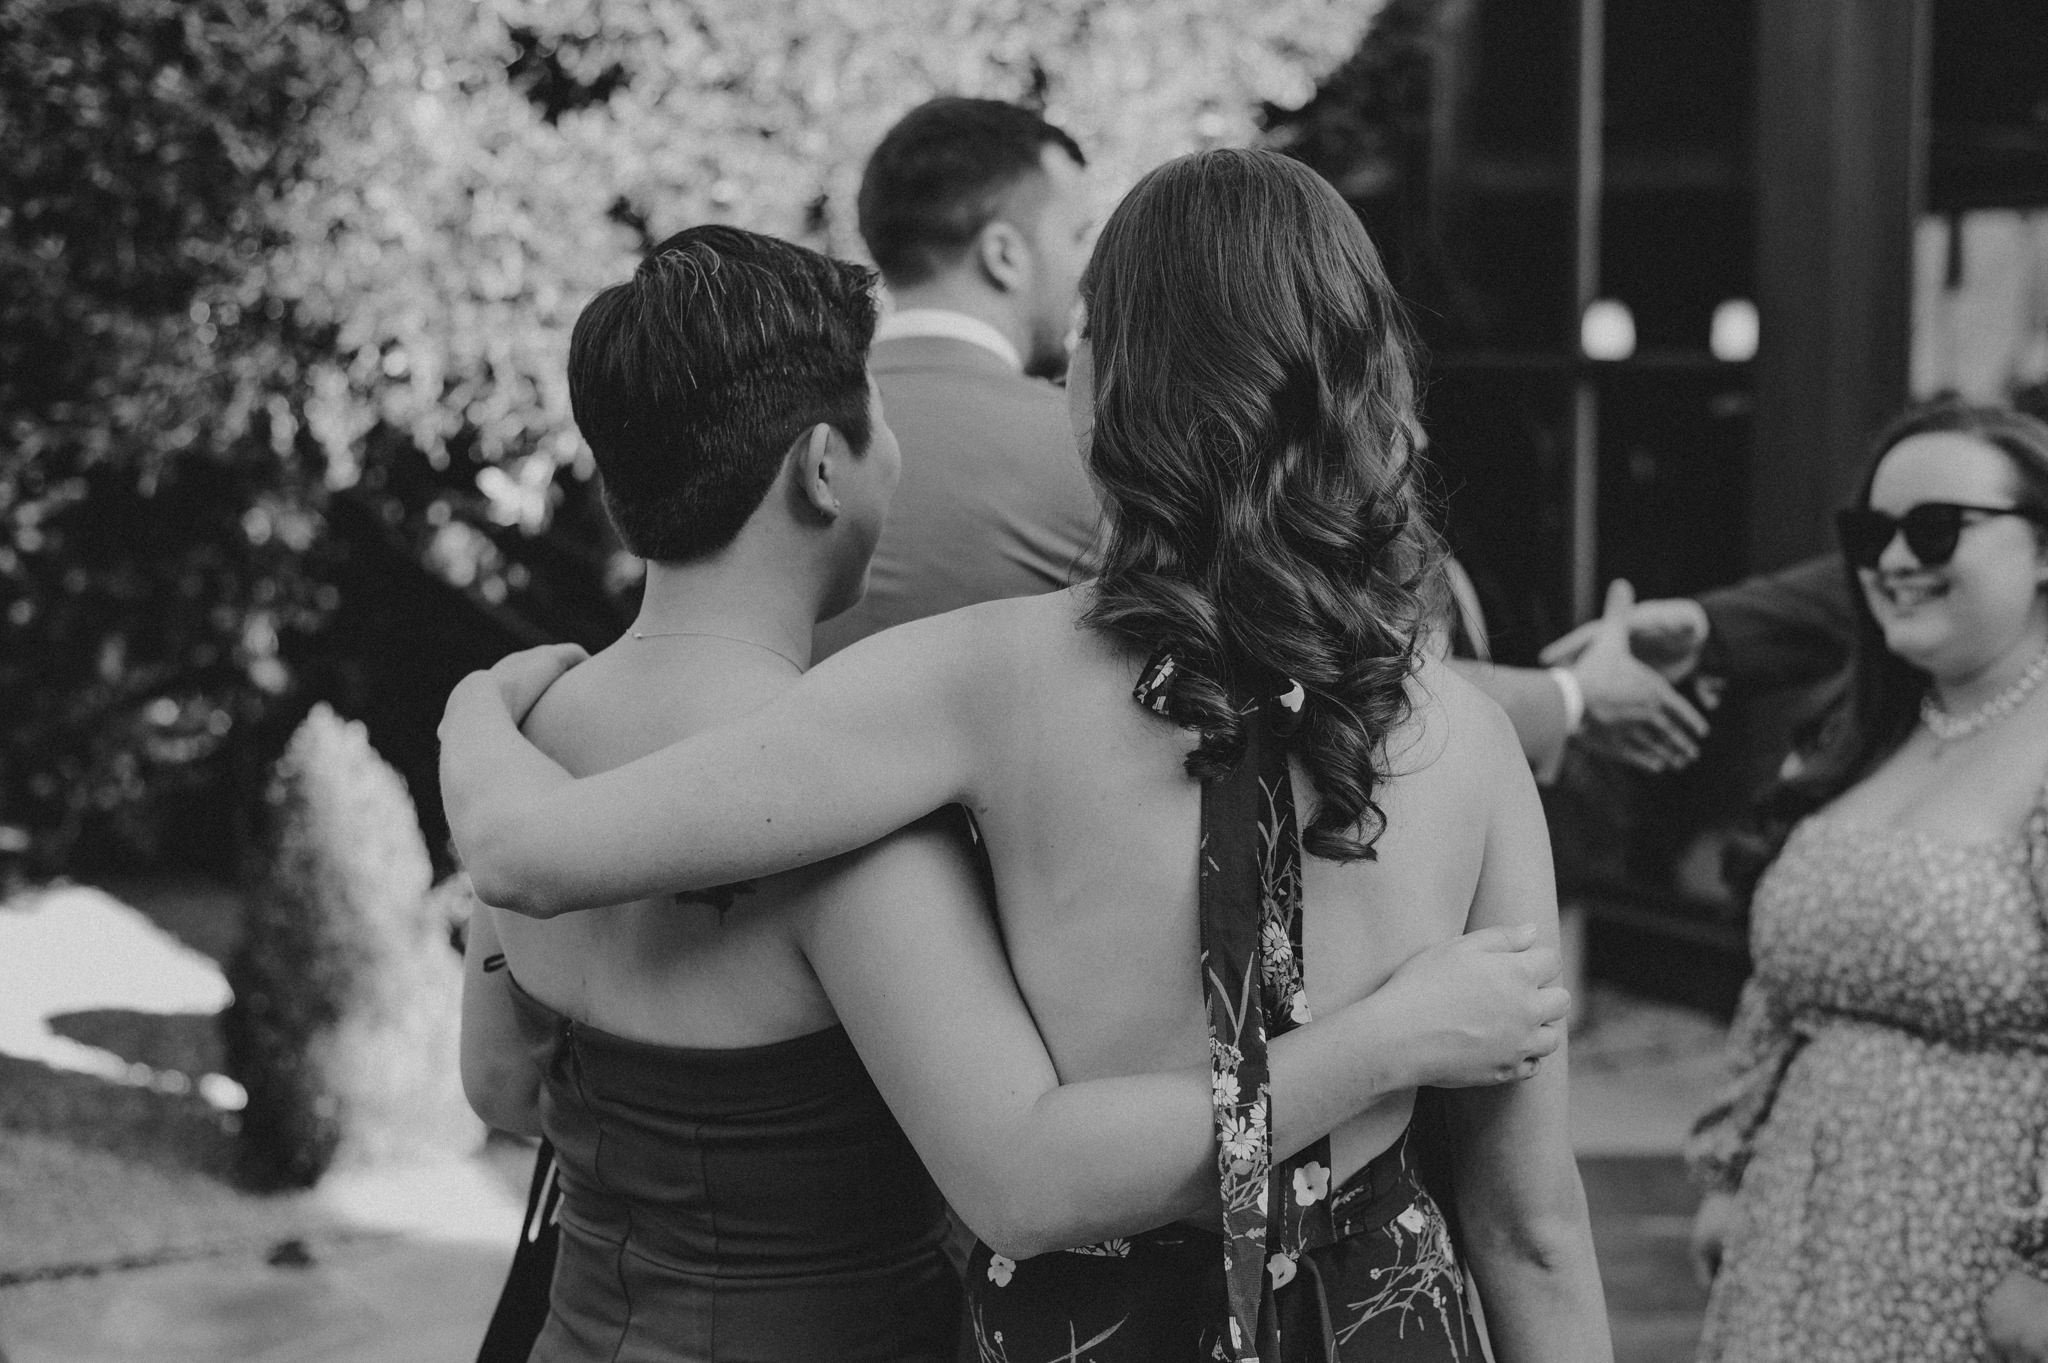 the fig house wedding - queer wedding photographers in los angeles - itlaphoto.com-58.jpg